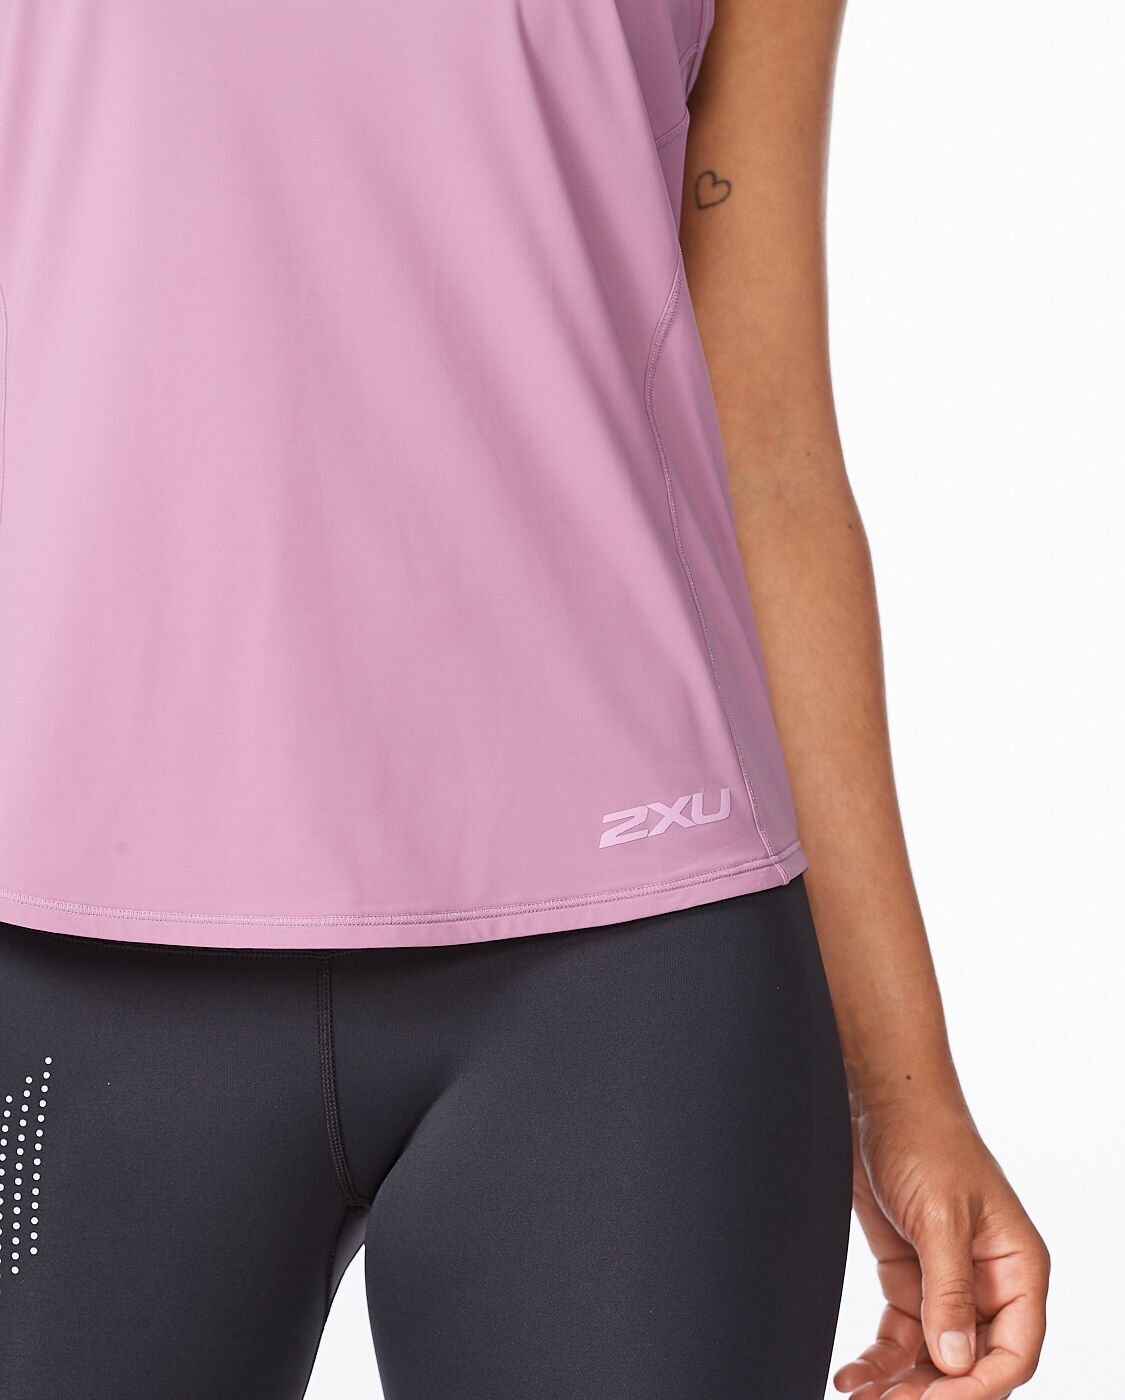 2XU South Africa - Women's Motion Mesh Tank - Orchid Mist/Lavender Herb